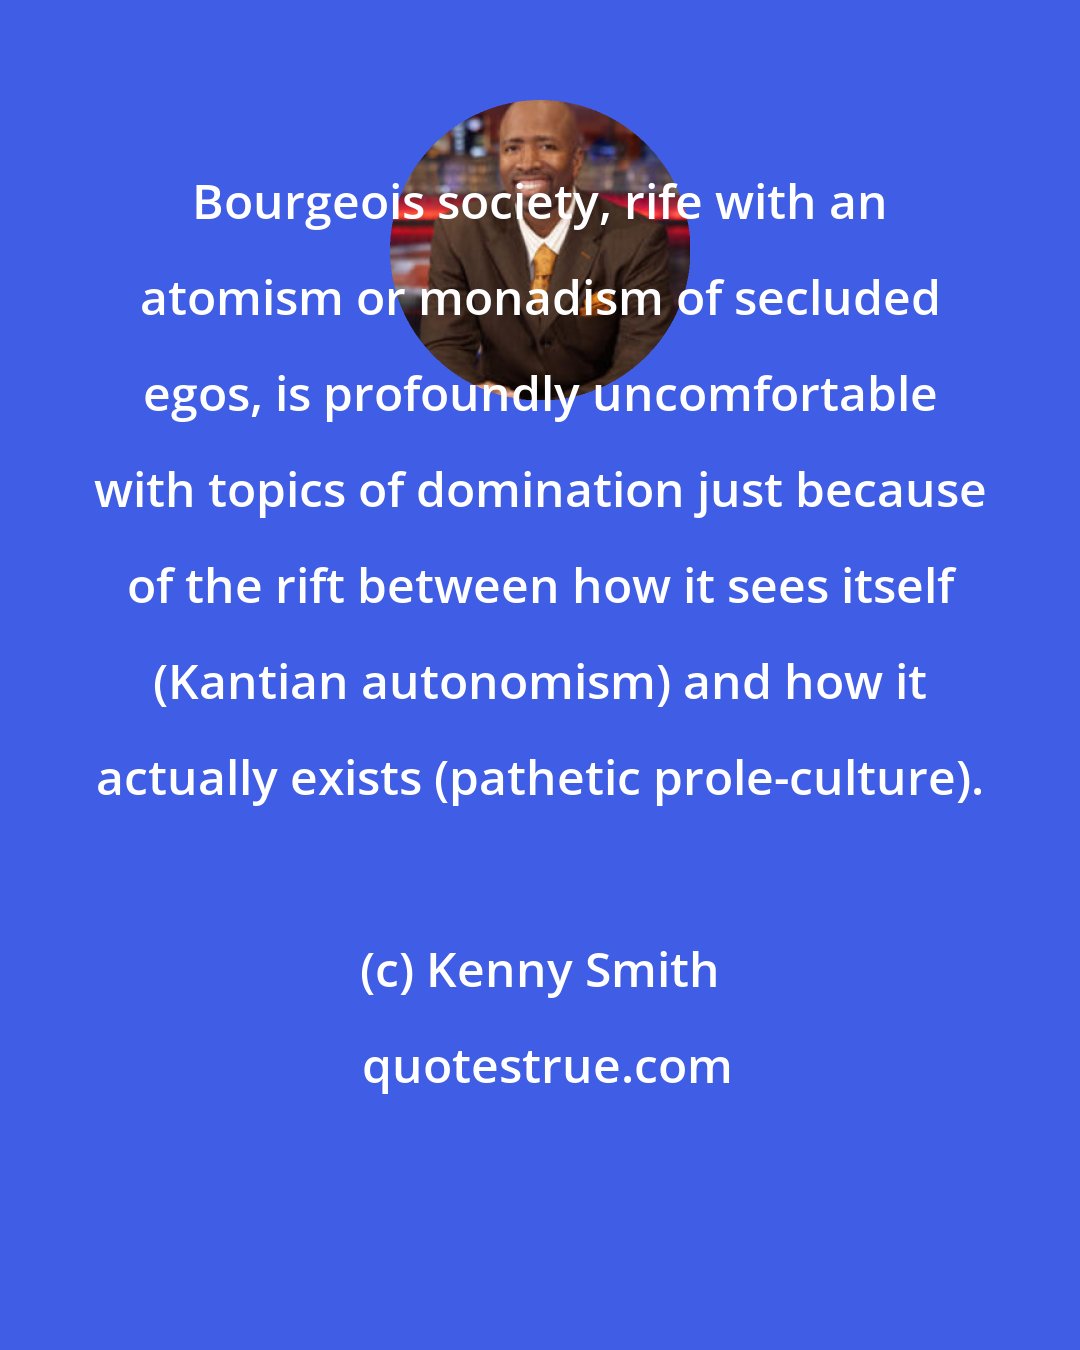 Kenny Smith: Bourgeois society, rife with an atomism or monadism of secluded egos, is profoundly uncomfortable with topics of domination just because of the rift between how it sees itself (Kantian autonomism) and how it actually exists (pathetic prole-culture).